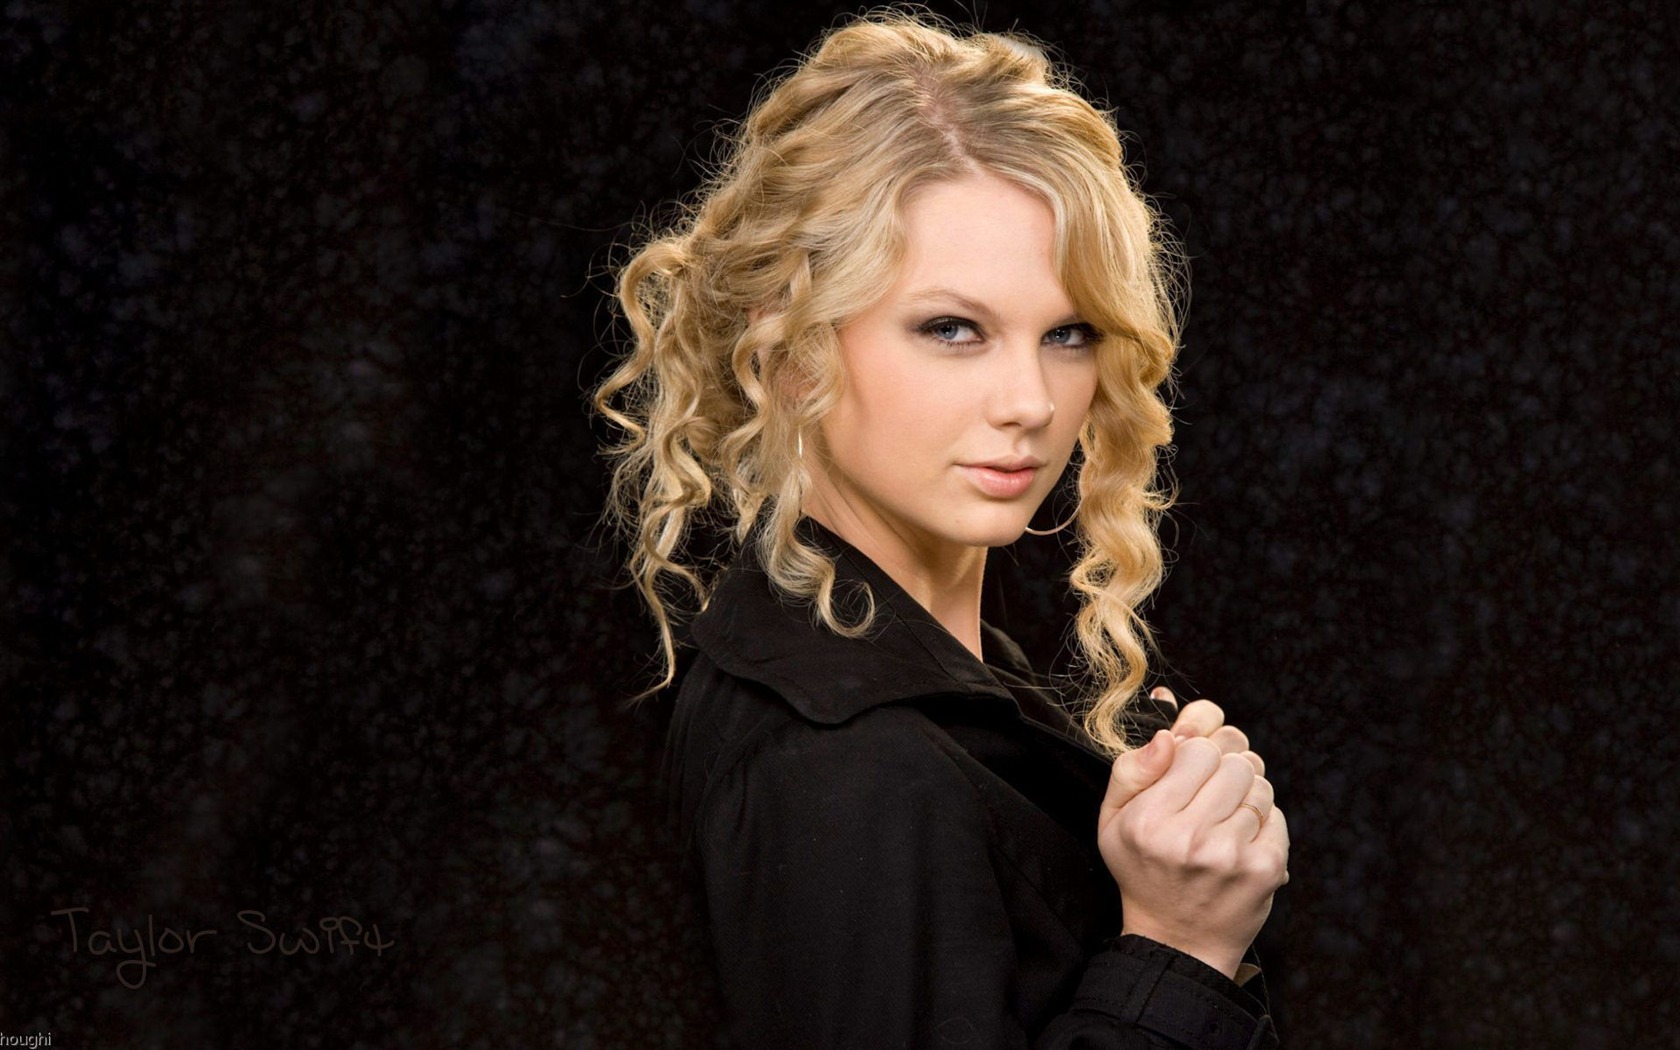 Taylor Swift #043 - 1680x1050 Wallpapers Pictures Photos Images